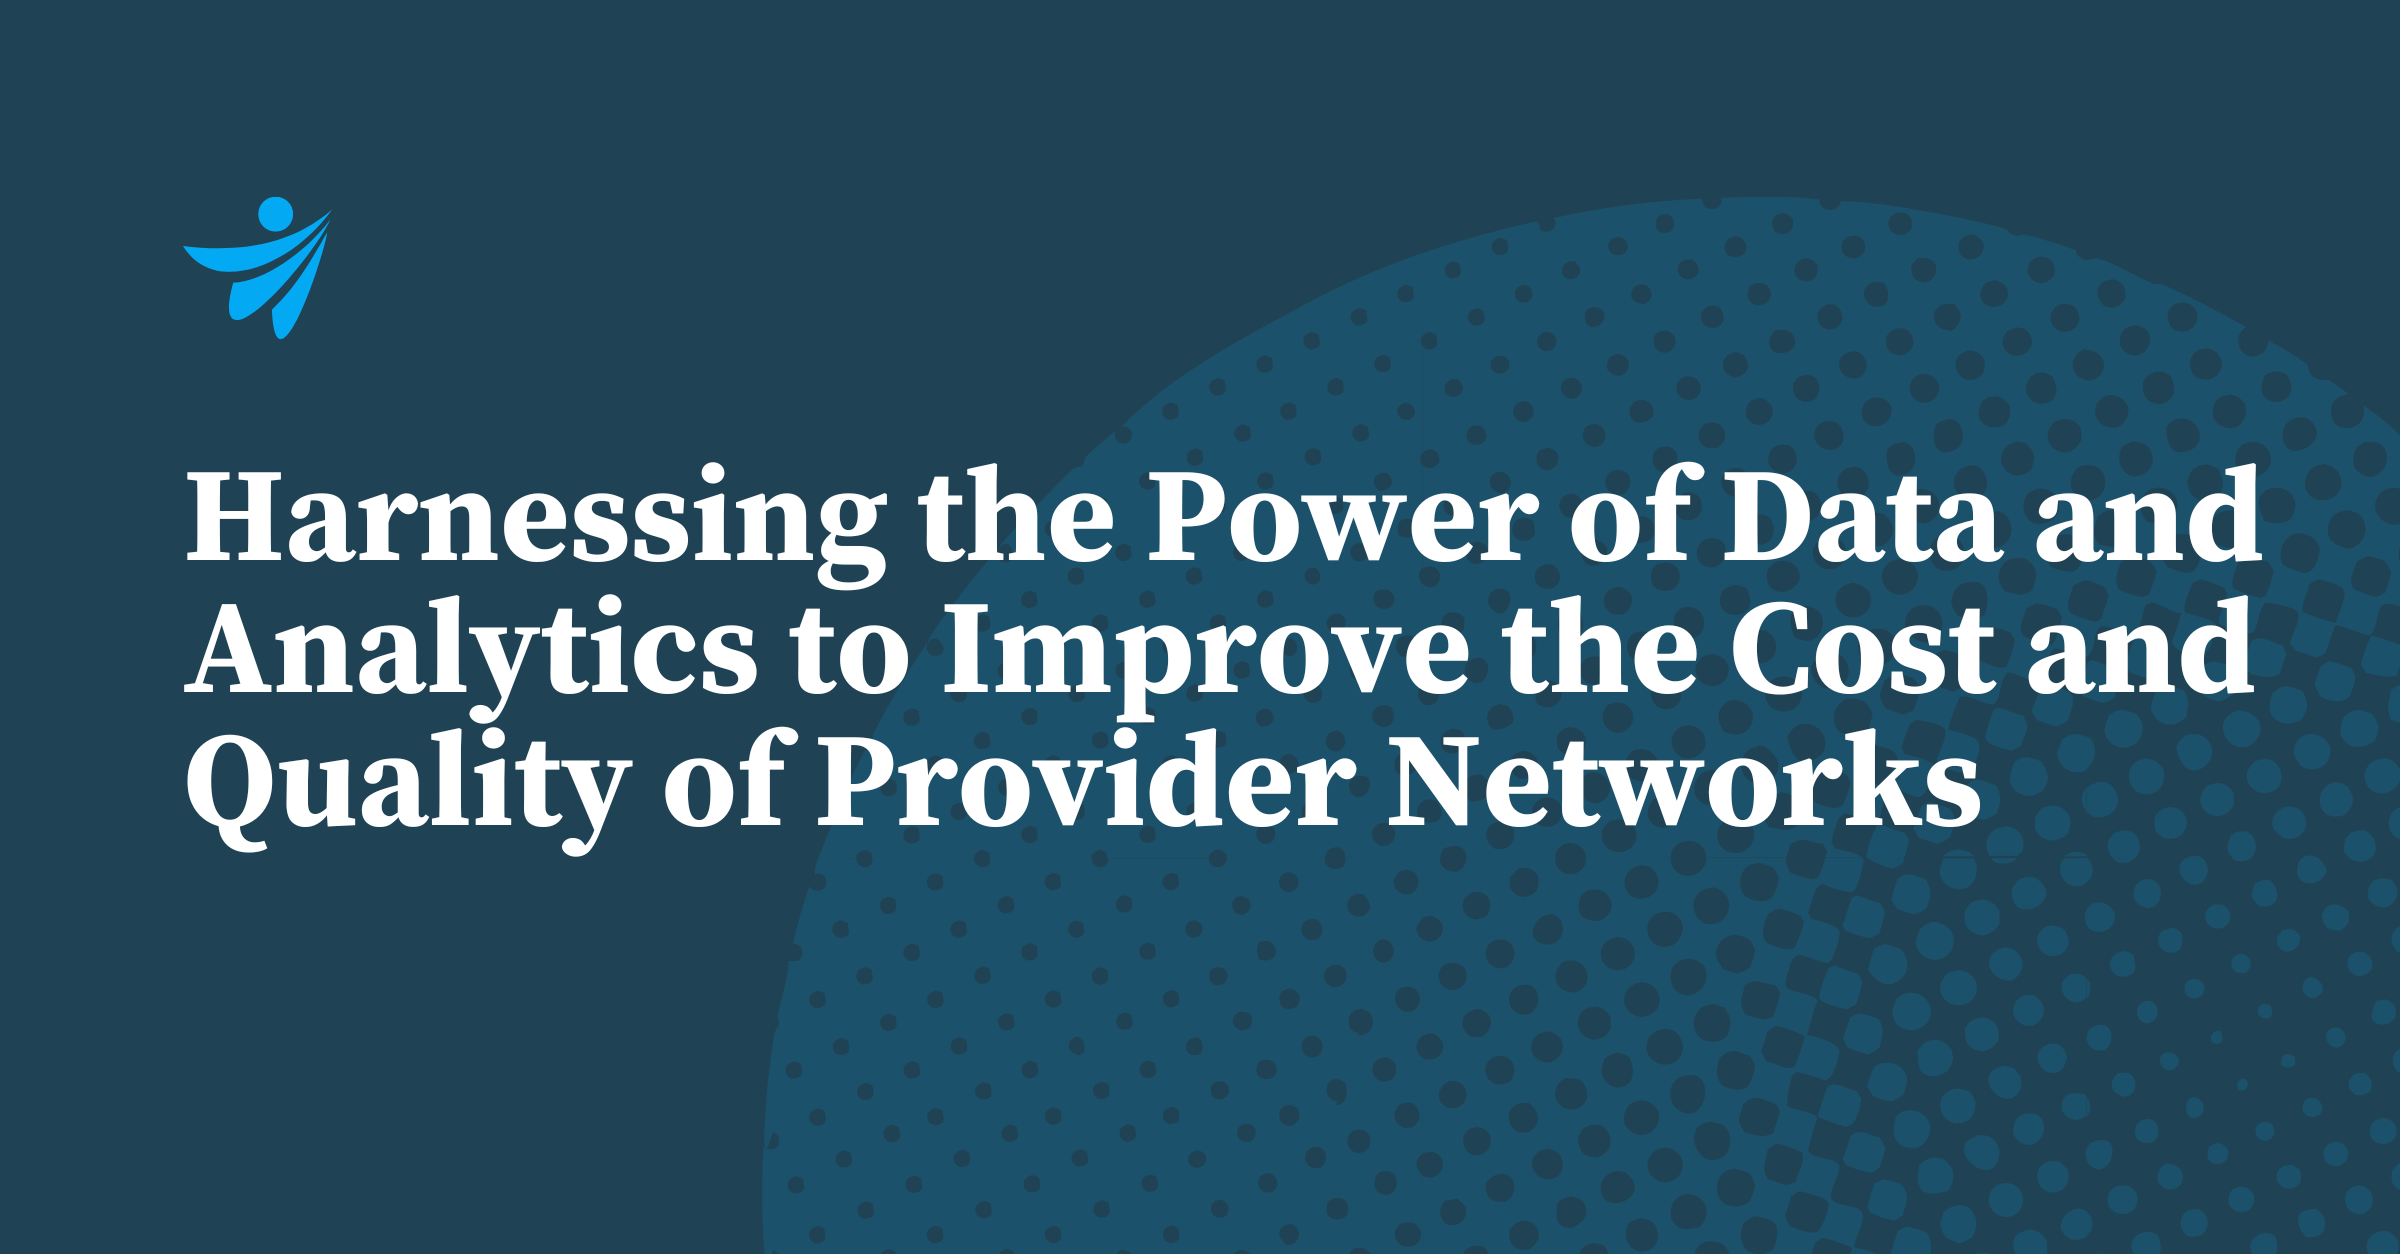 Thumbnail for Harnessing the Power of Data and Analytics to Improve the Cost and Quality of Provider Networks